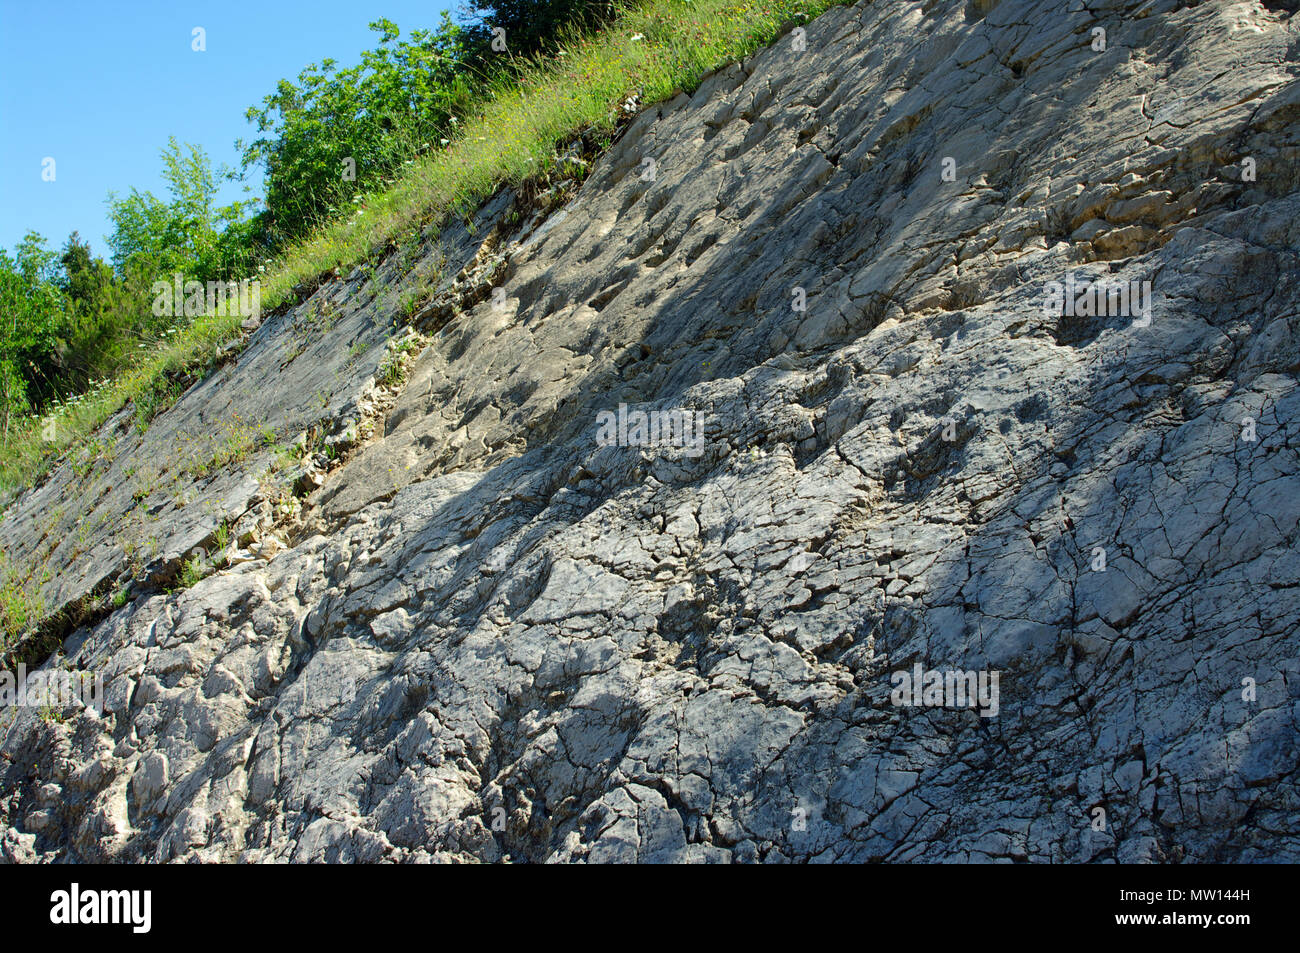 about 80 footprints of Dinosaurs found in Esperia,province of Frosinone,Italy, Europe Stock Photo